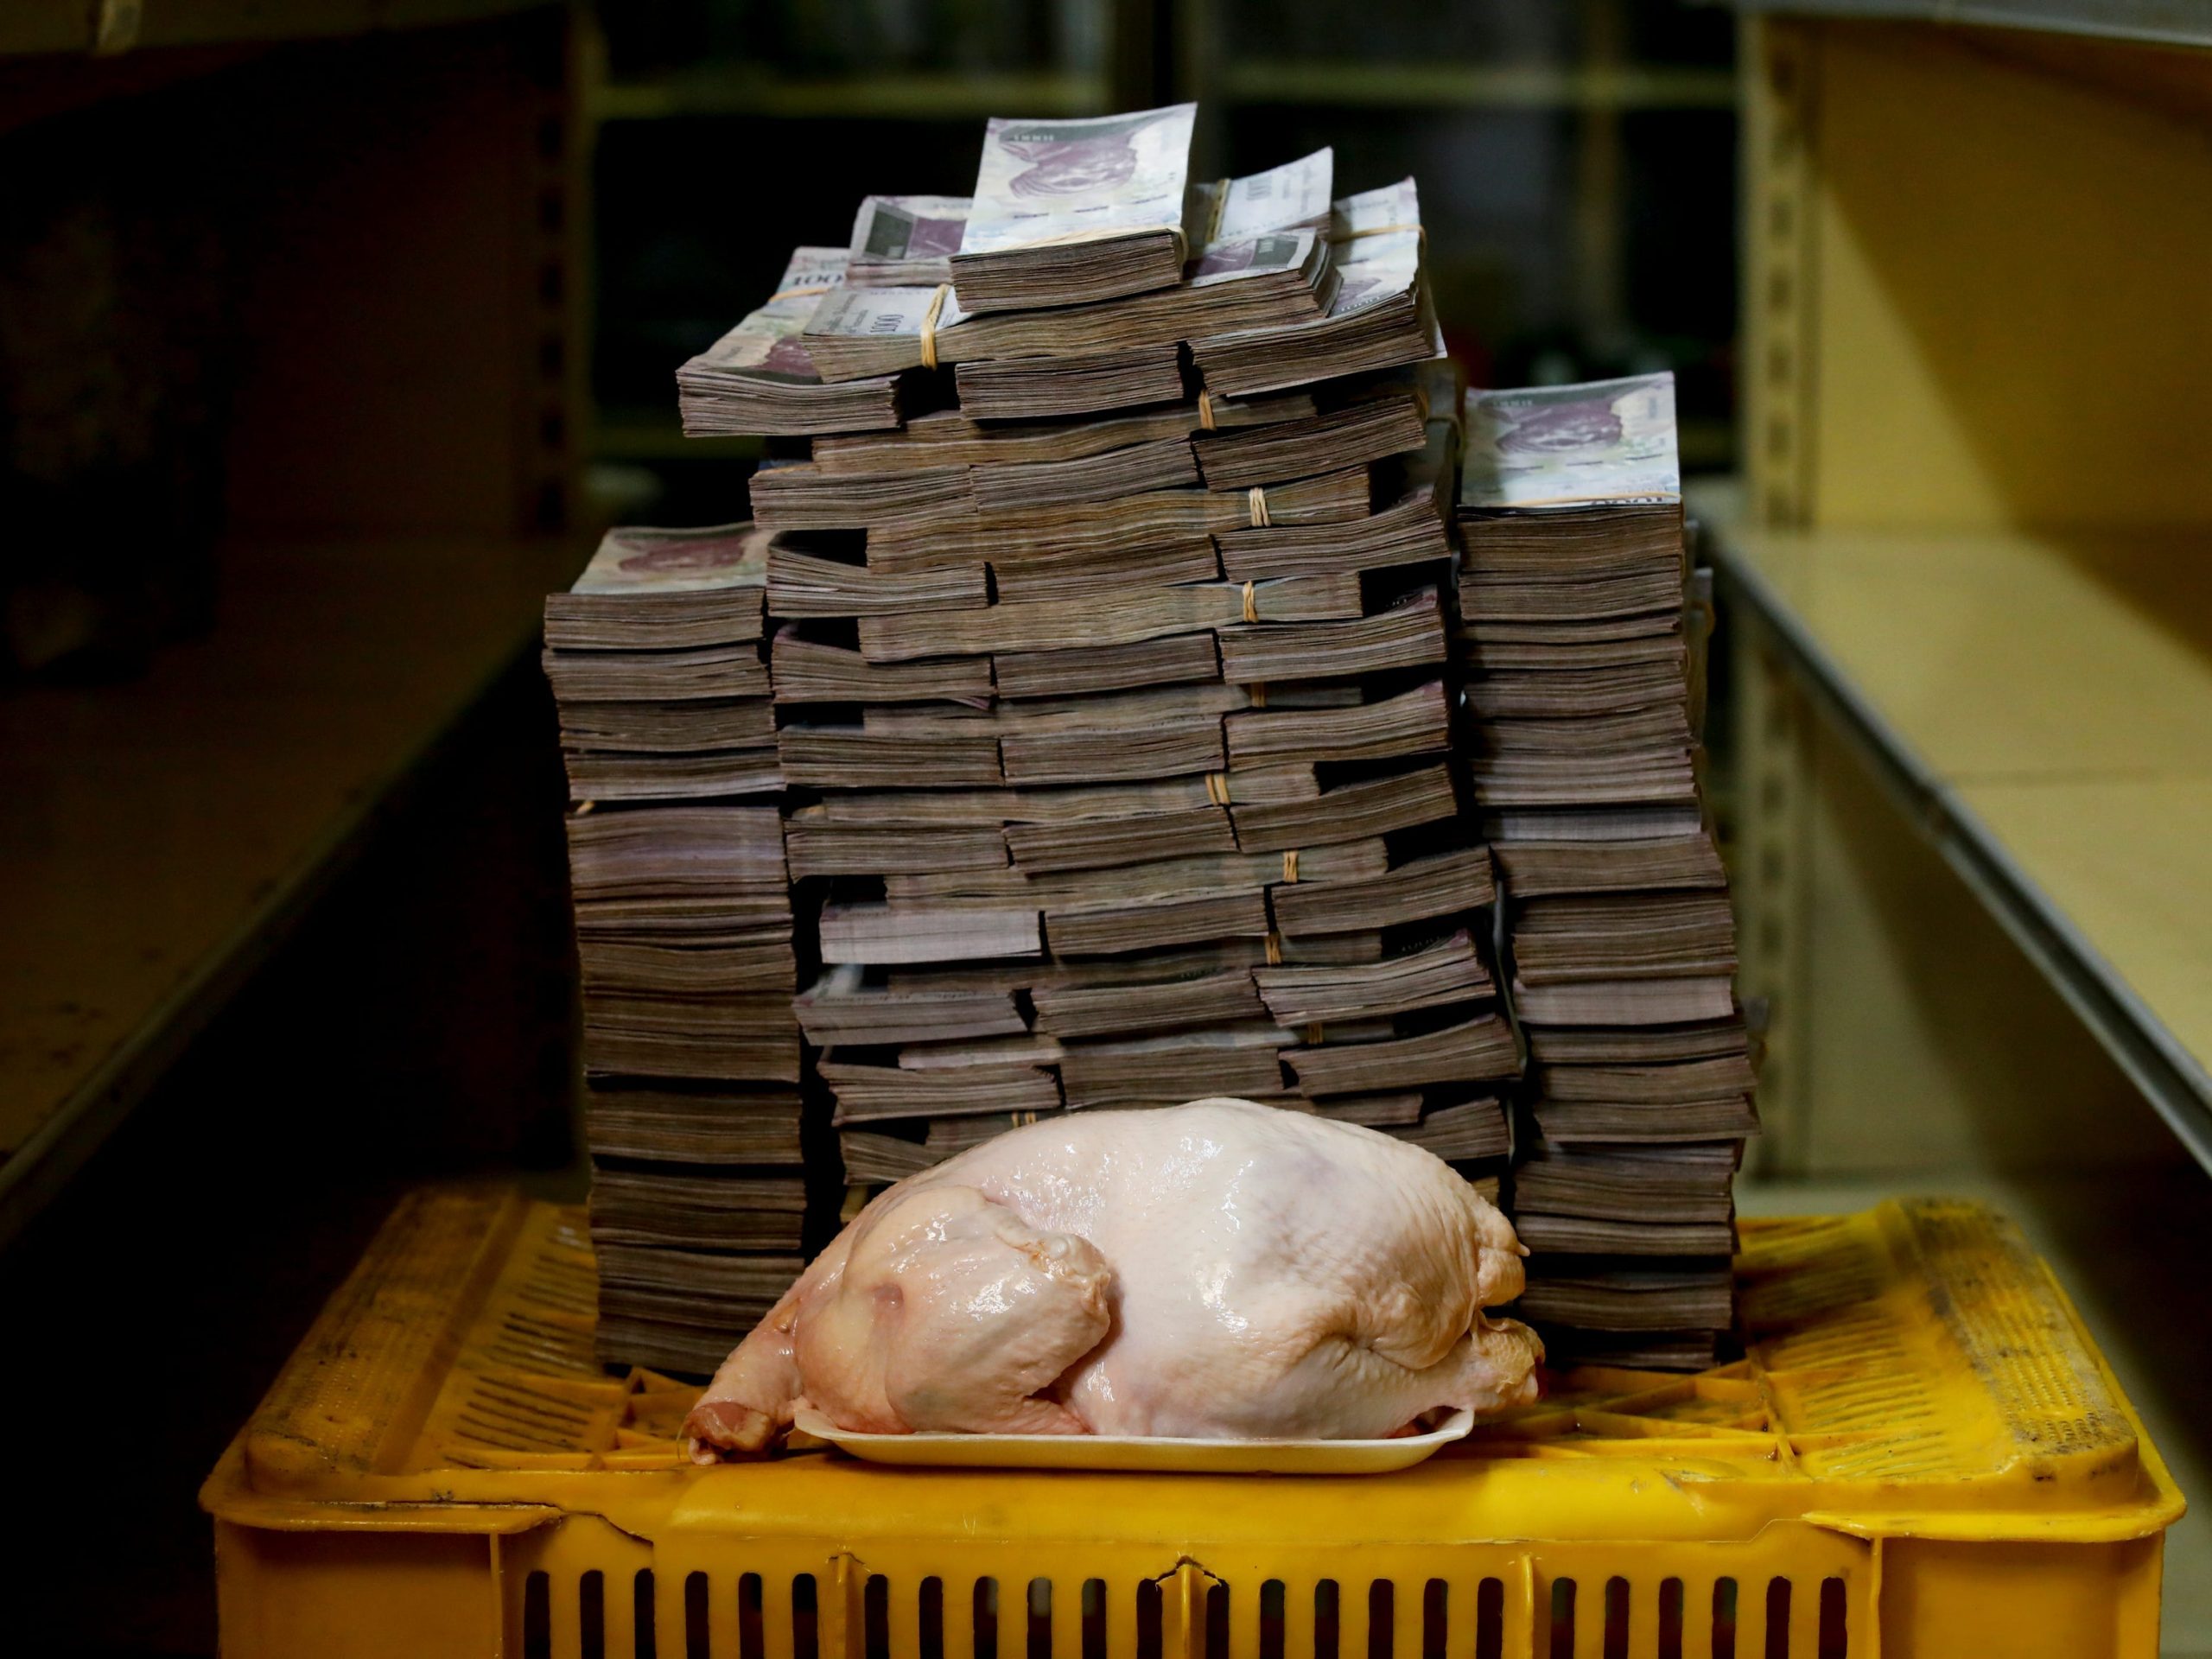 In 2018, a five-pound chicken in Caracas cost 14.6 million bolivars, the equivalent of $2.22.